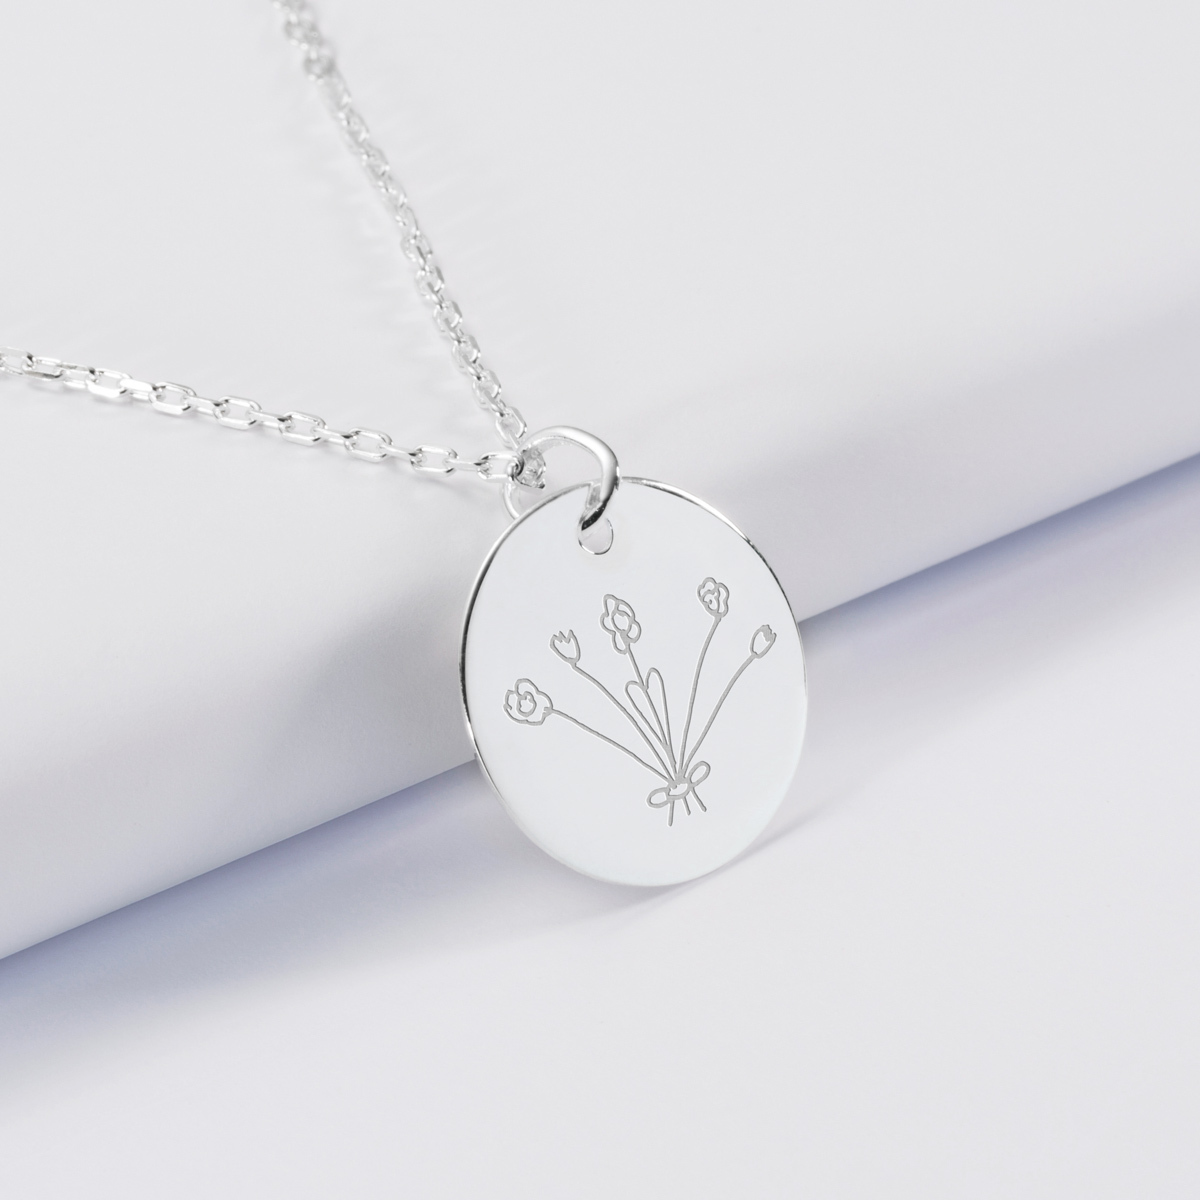 Personalised engraved silver medallion pendant 19 mm - writing